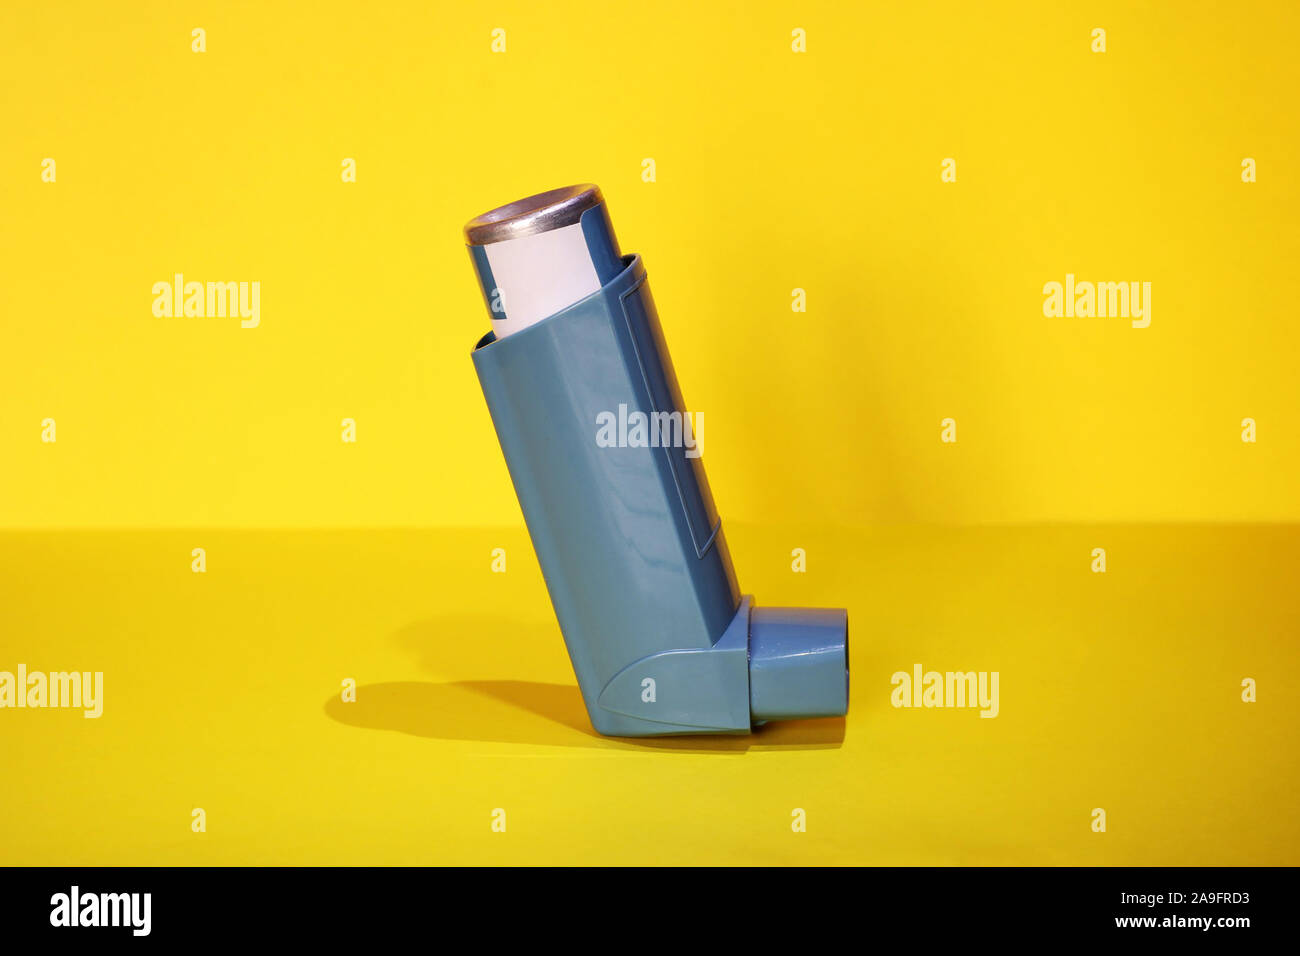 Blue asthma inhaler on a yellow background. Pharmaceutical product to prevent and treat an asthma attack. Stock Photo